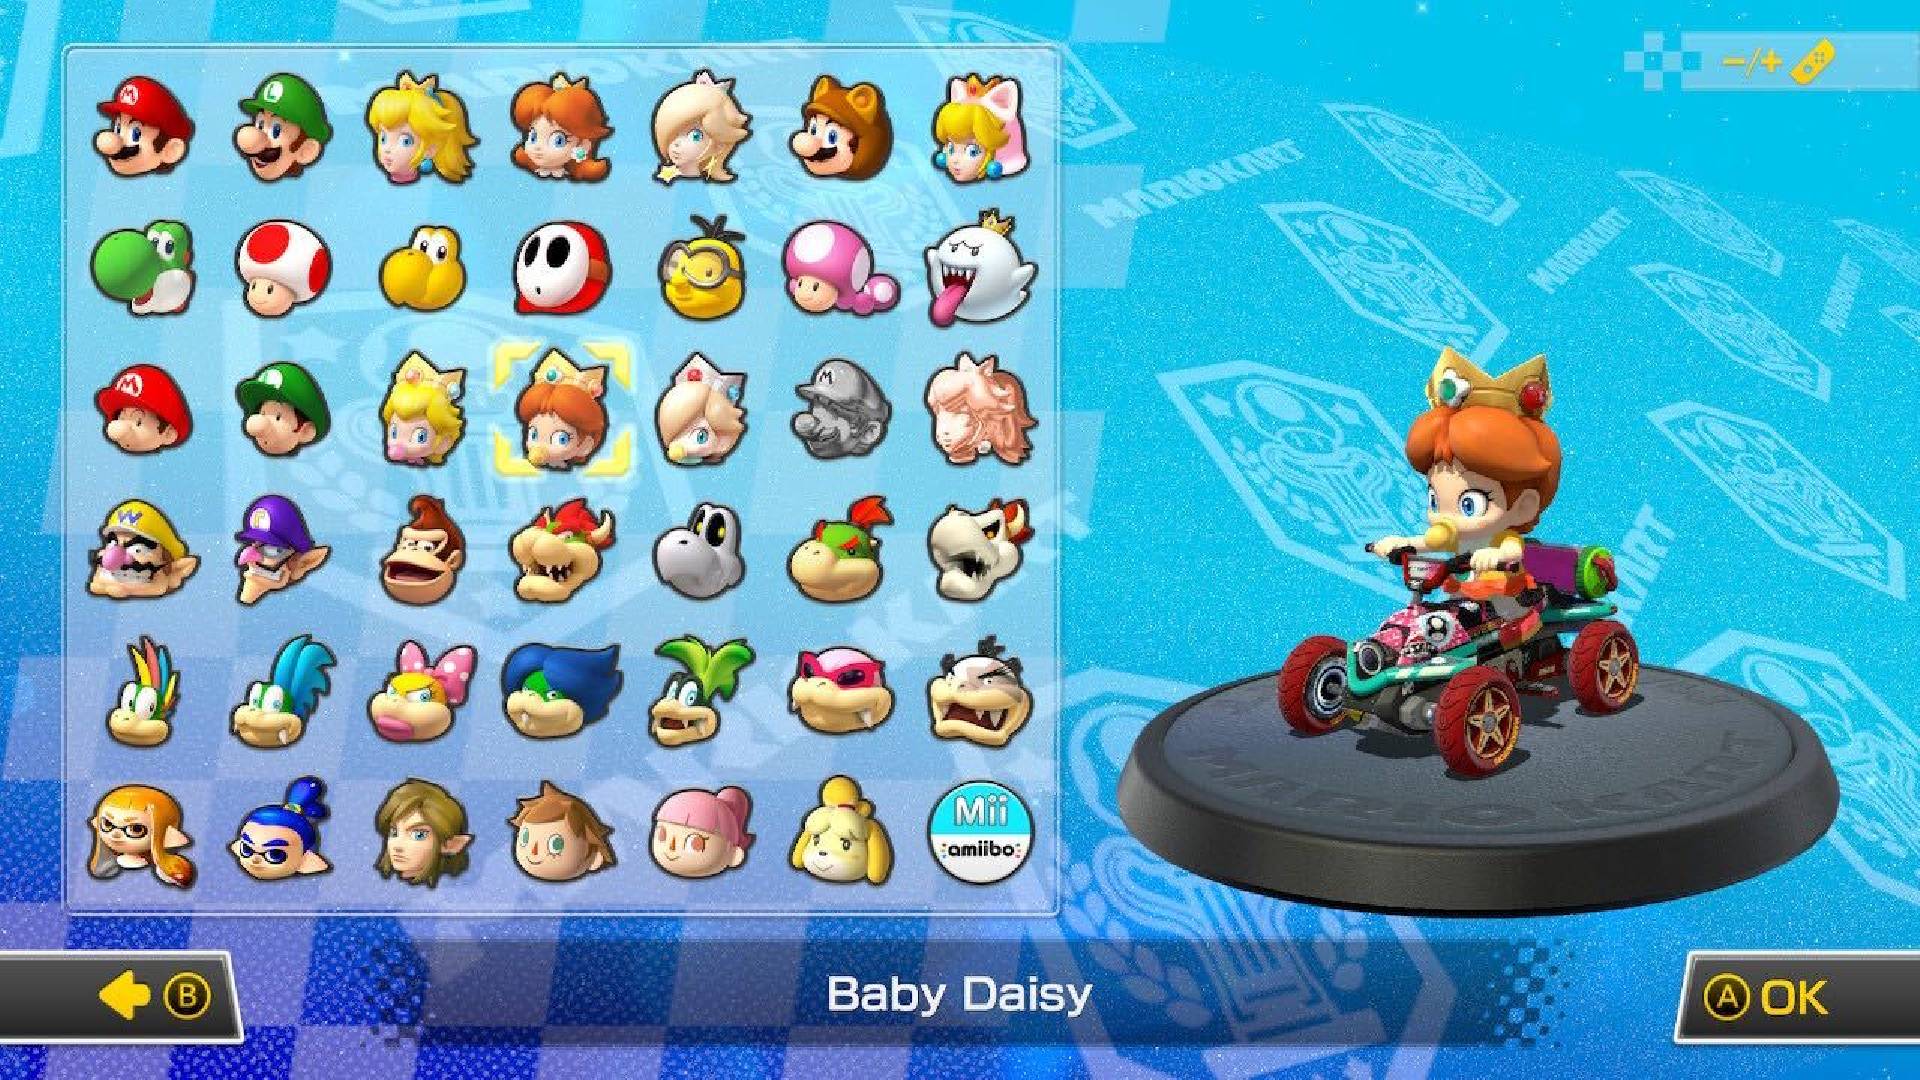 Baby Daisy is visible on a character selection screen, sitting in a kart